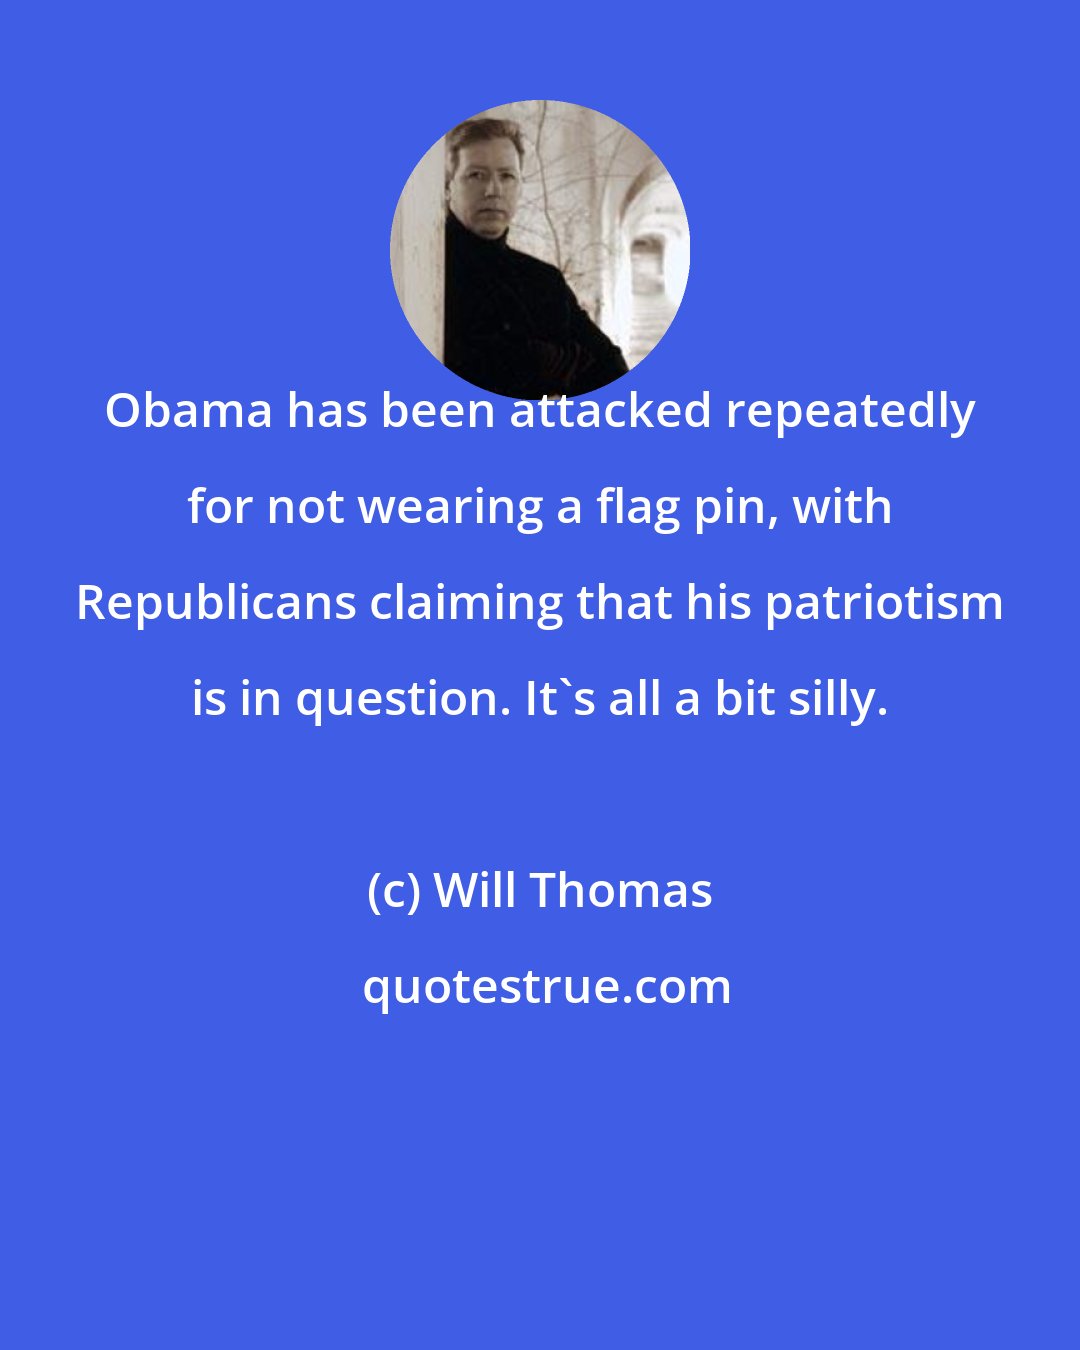 Will Thomas: Obama has been attacked repeatedly for not wearing a flag pin, with Republicans claiming that his patriotism is in question. It's all a bit silly.